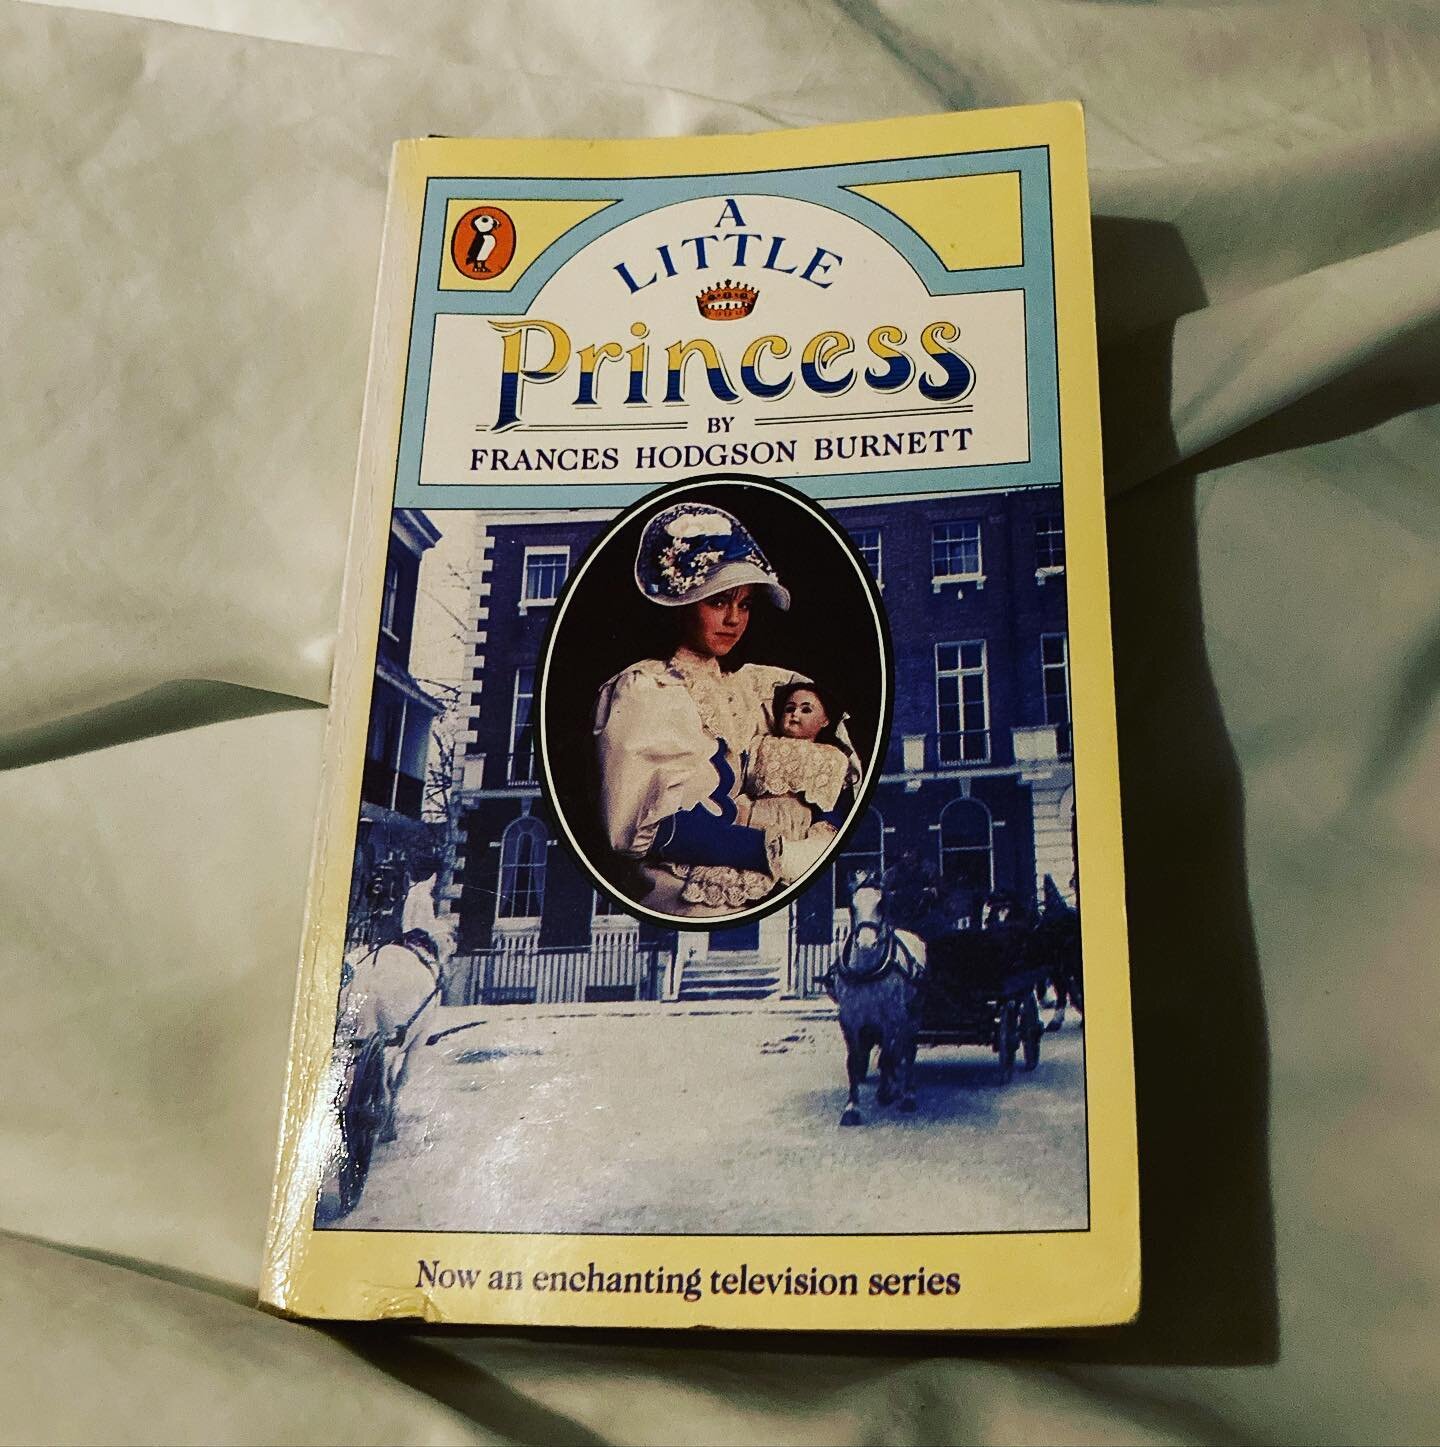 I have instigated candlelit bedtime stories in my bed. (I also have a reading light, my ageing eyes definitely can&rsquo;t actually read by candlelight). Last night it was my 80s Puffin TV tie-in edition of A Little Princess. They tell me to report t